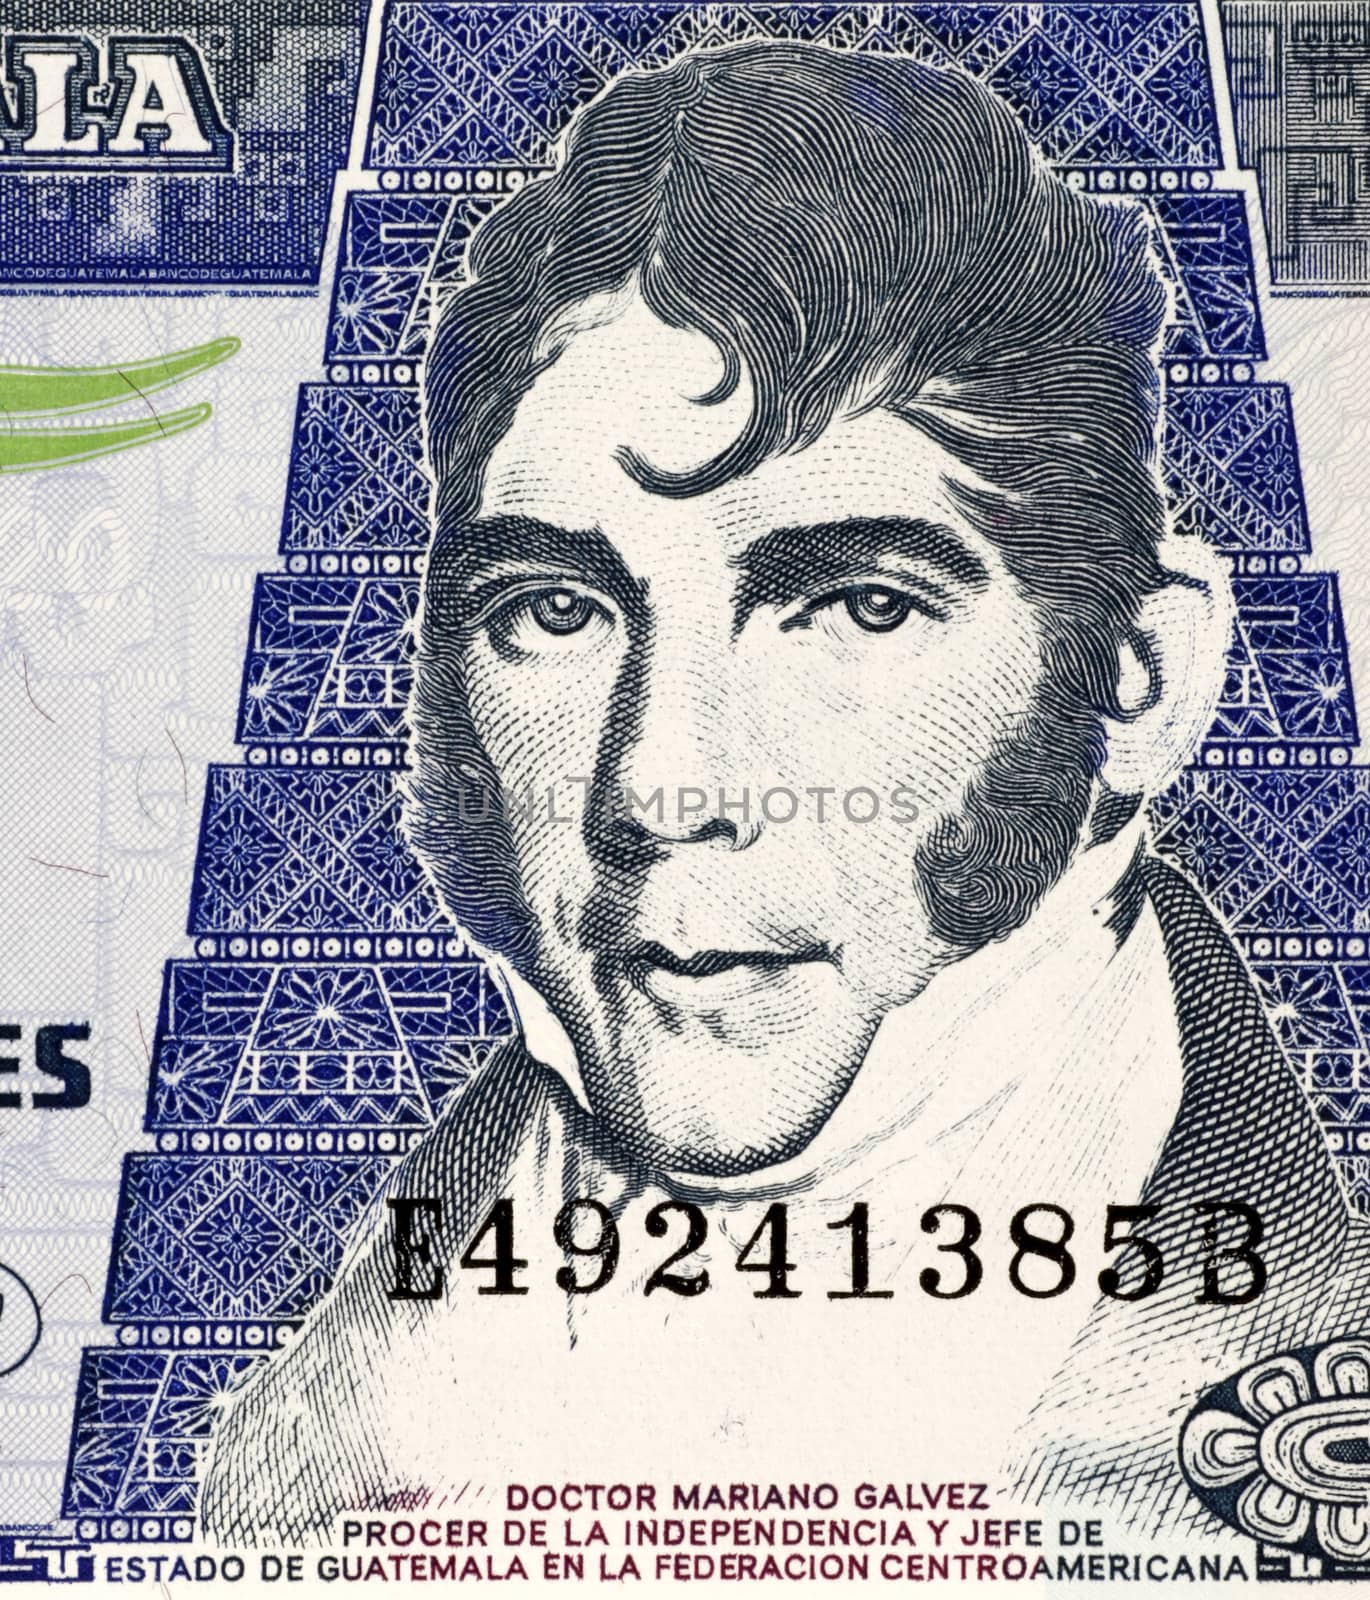 Mariano Galvez (1794-1862) on 20 Quetzales 2007 Banknote from Guatemala. Jurist and Liberal politician in Guatemala.